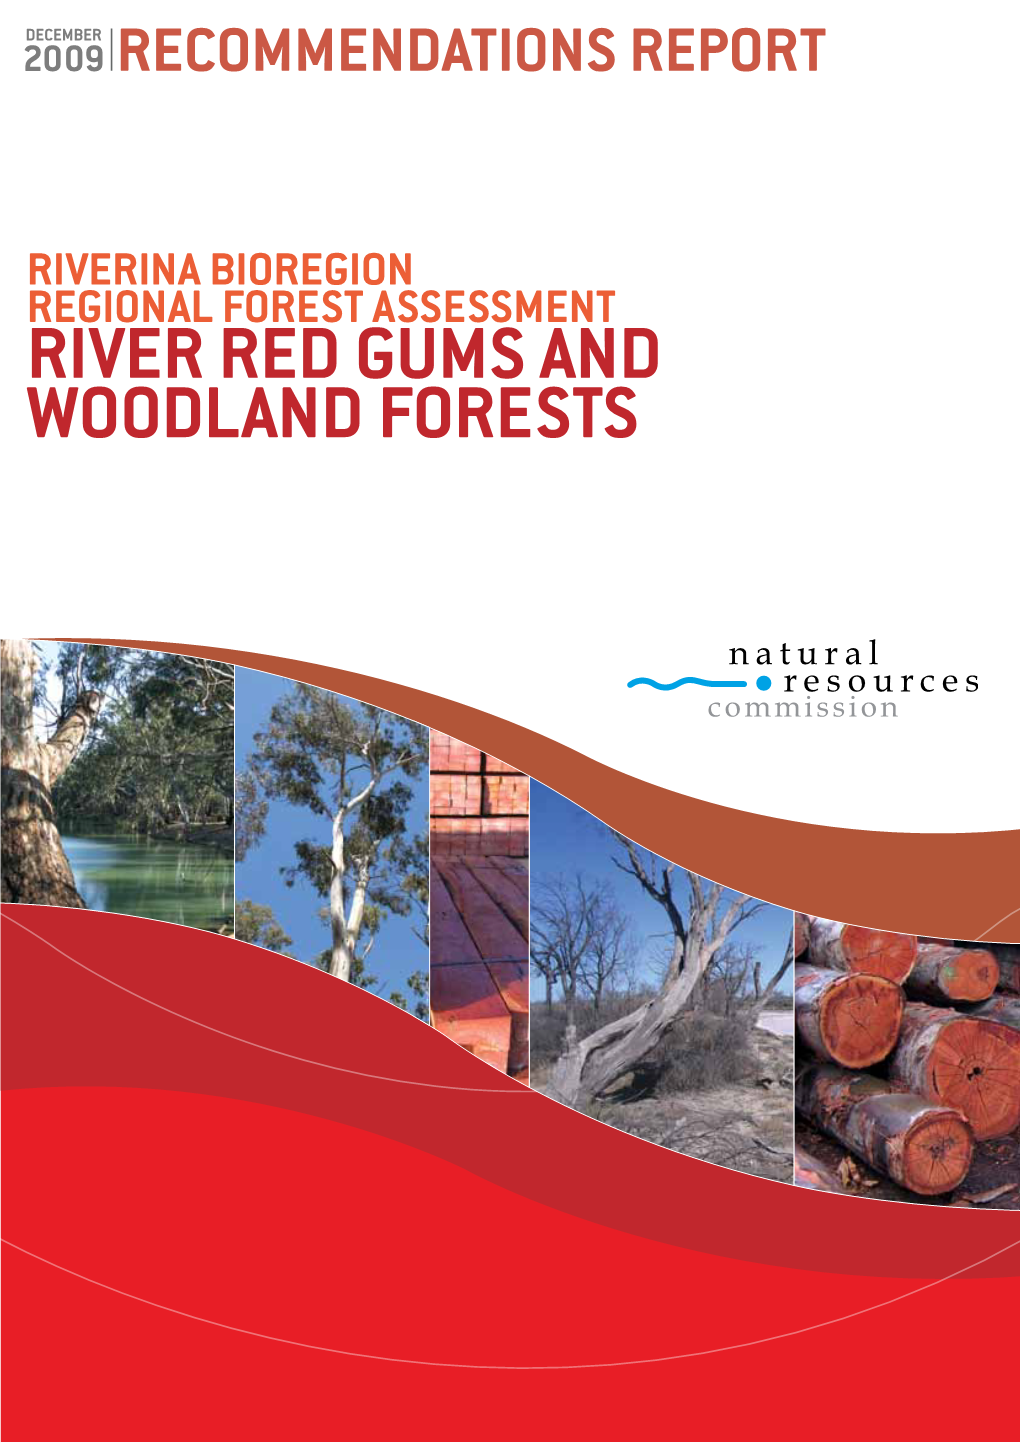 Riverina Bioregion Regional Forest Assignment: River Red Gums And